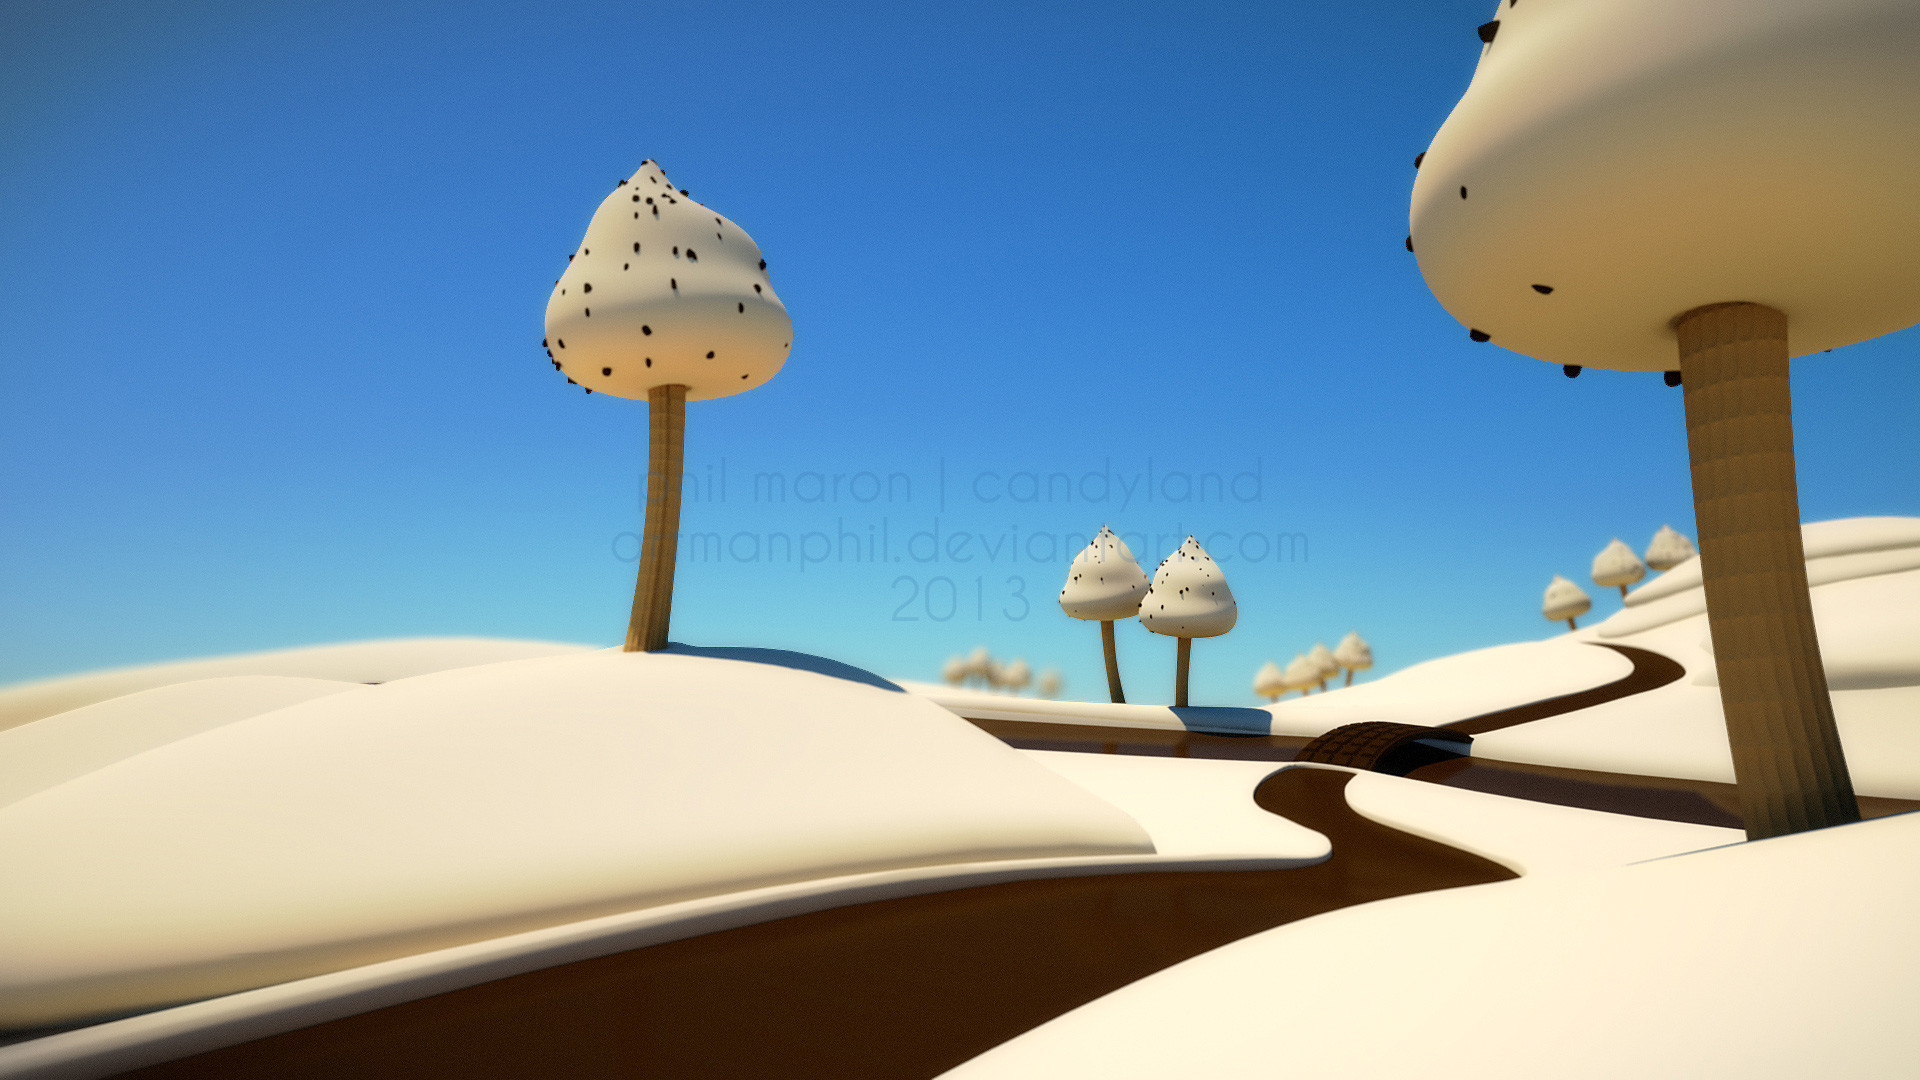 1920x1080 ... Candyland - Scenery render test 01 by artmanphil